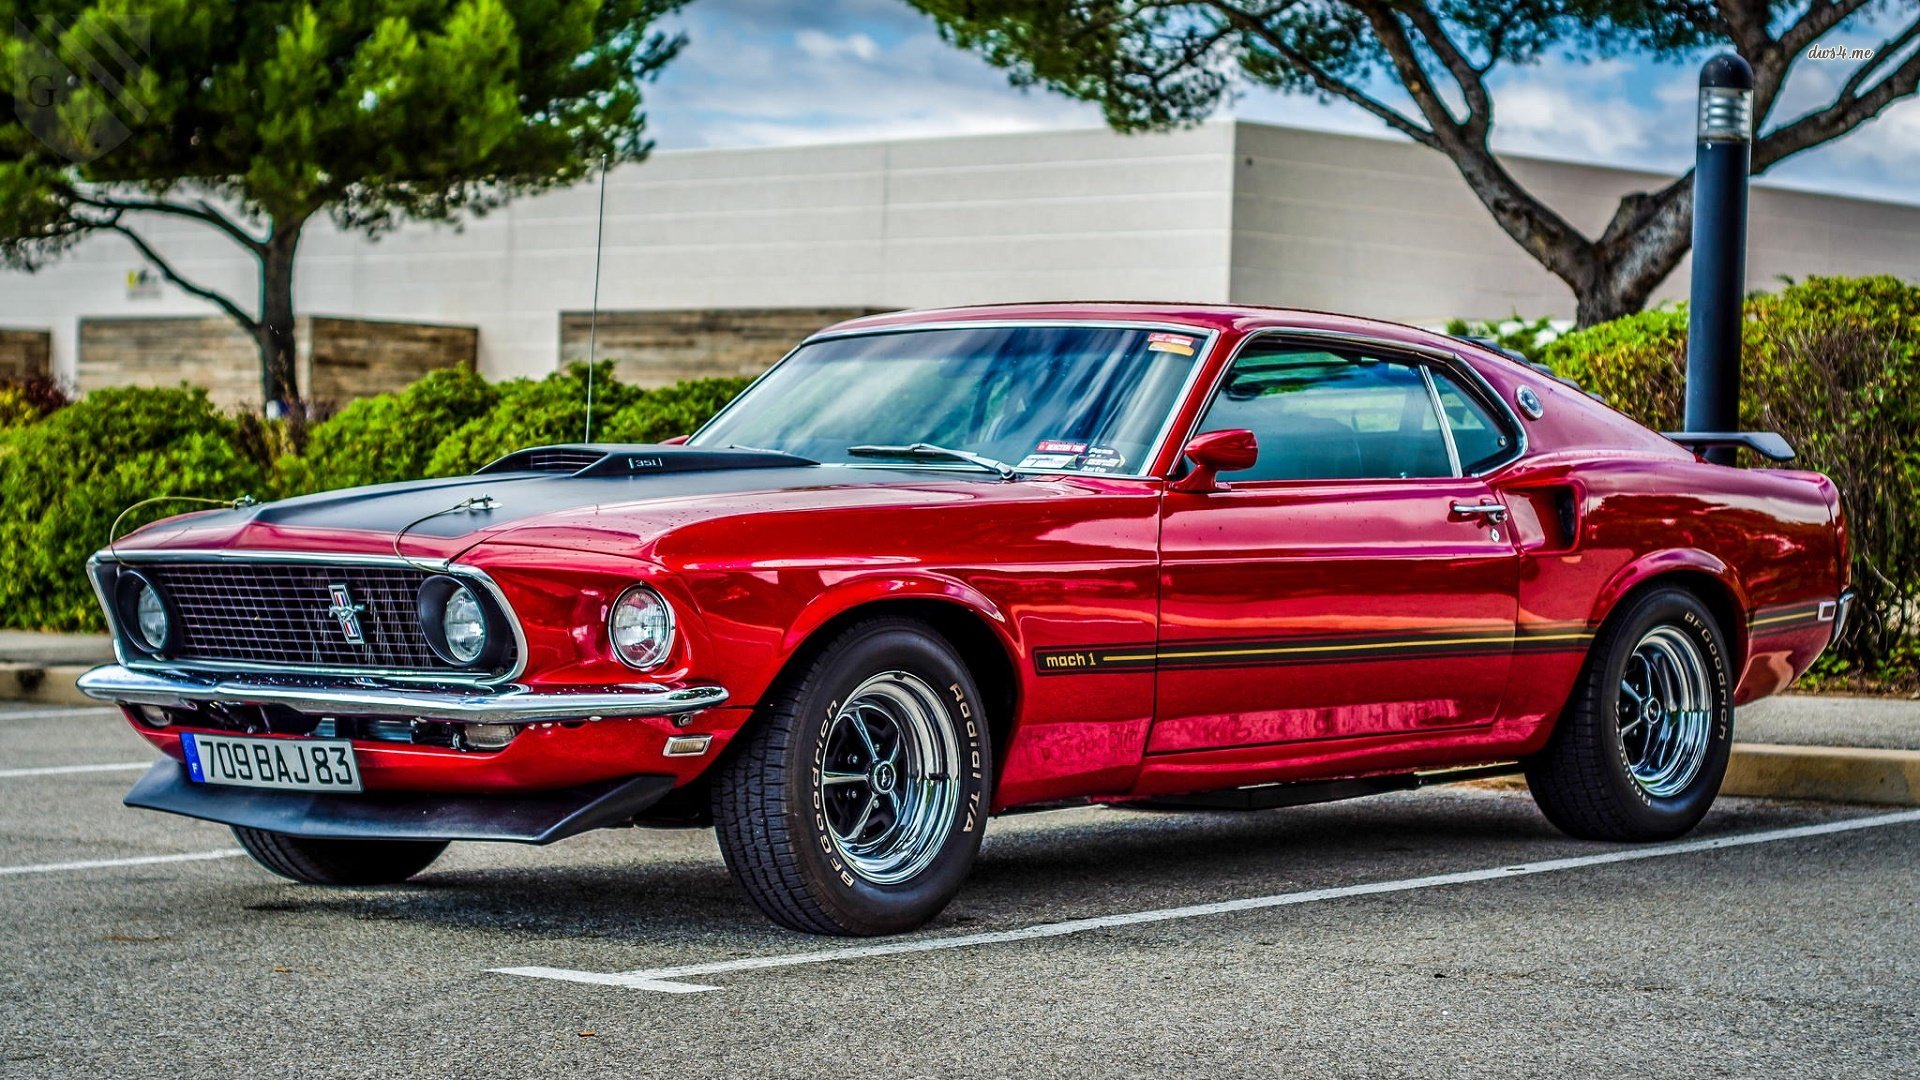 Ford Mustang Mach 1 HD Wallpaper. Background Imagex1080